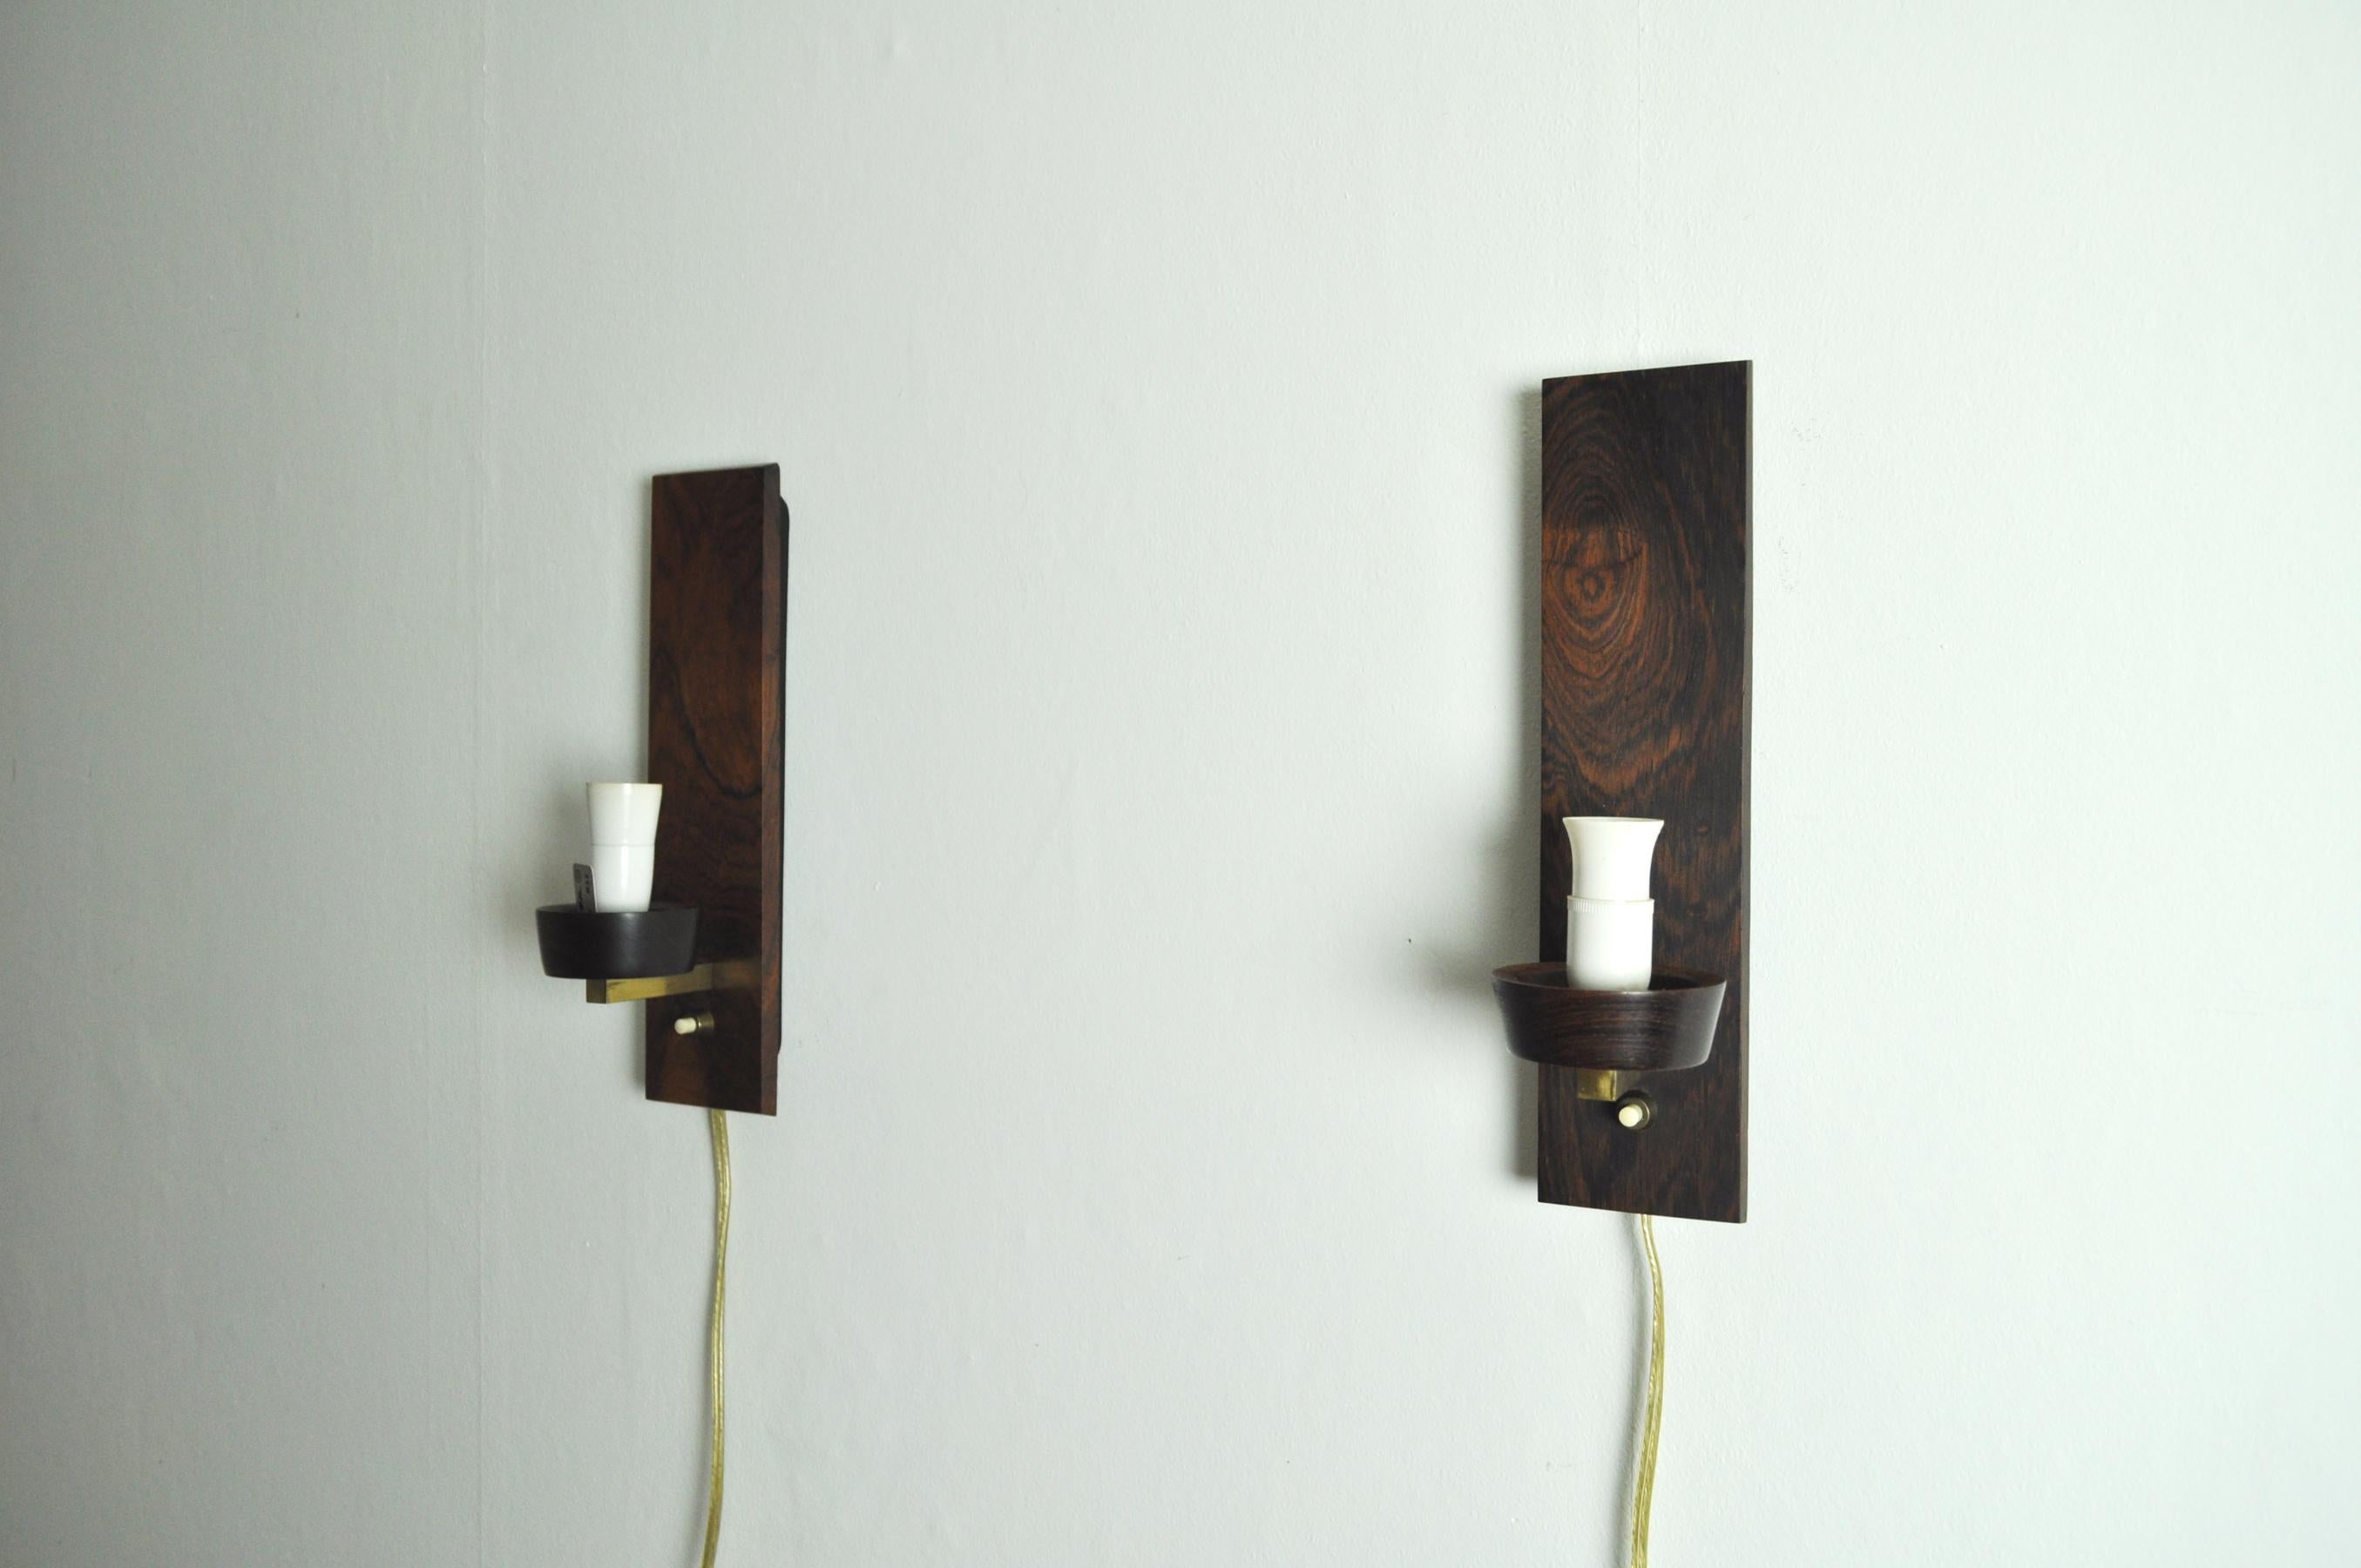 A pair of Danish modern rosewood and glass wall sconce by Lyfa in the 1960s.
The design features a back in black metal and rosewood, Fine brass details and rosewood holder for the white and transparent glass shade.
Excellent vintage